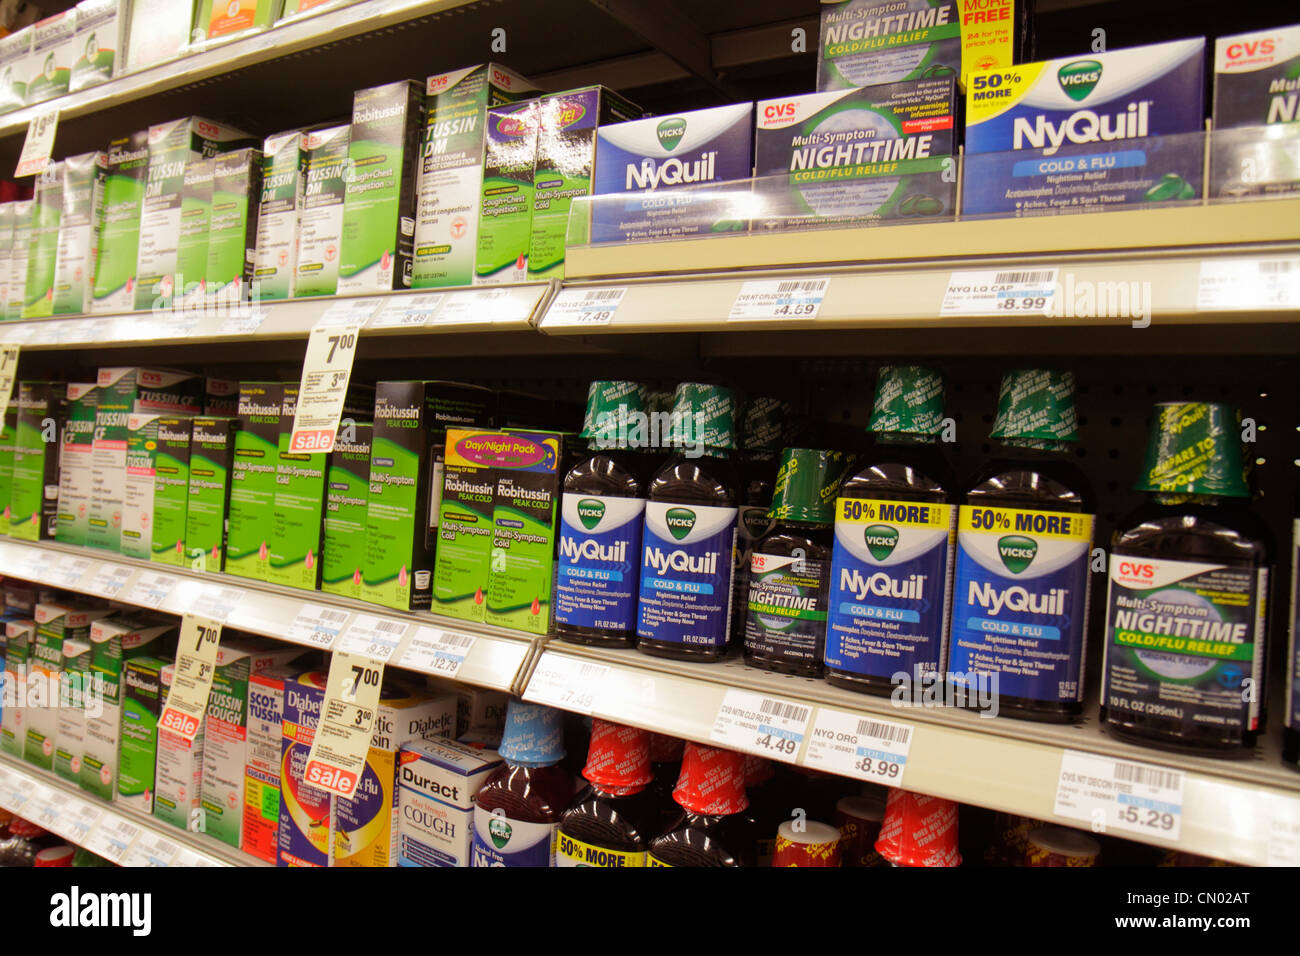 Miami Beach Florida,Fifth Street,Walgreens,pharmacie,pharmacie,drugstore,vente,marques,NyQuil,Robitussin,congestion sinusale,médecine froide,marque,ove Banque D'Images